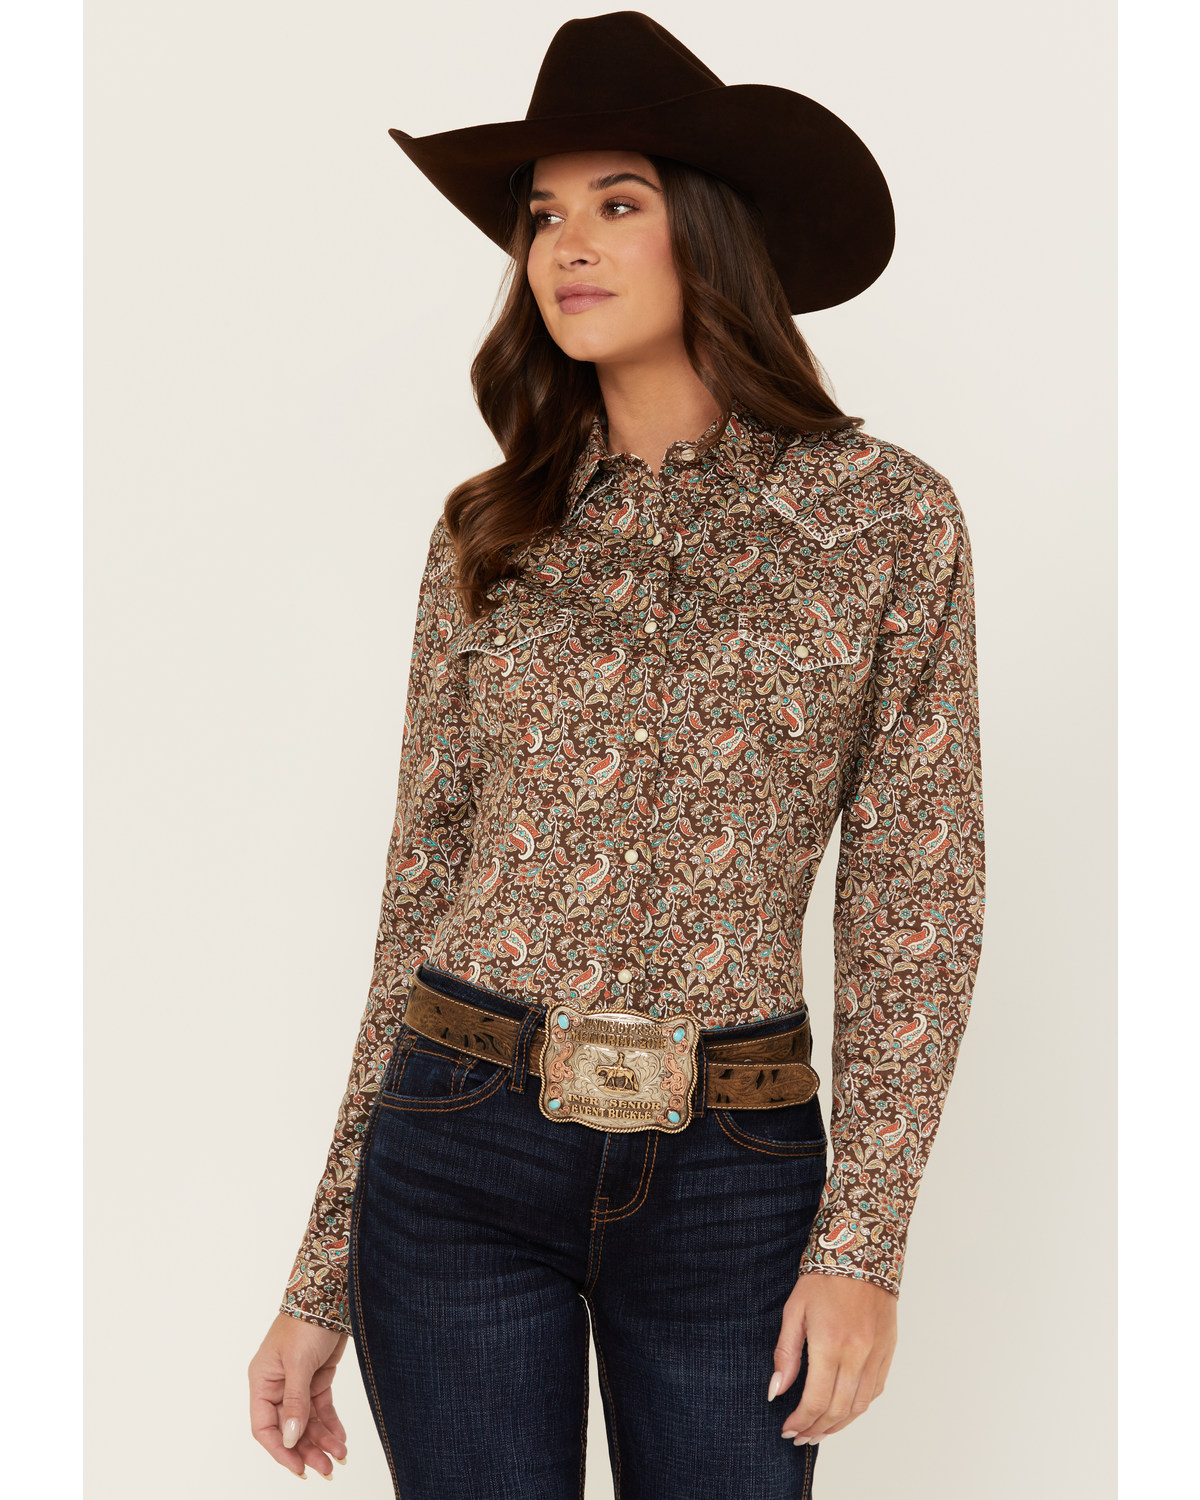 Rough Stock by Panhandle Women's Floral Print Long Sleeve Snap Stretch Western Shirt